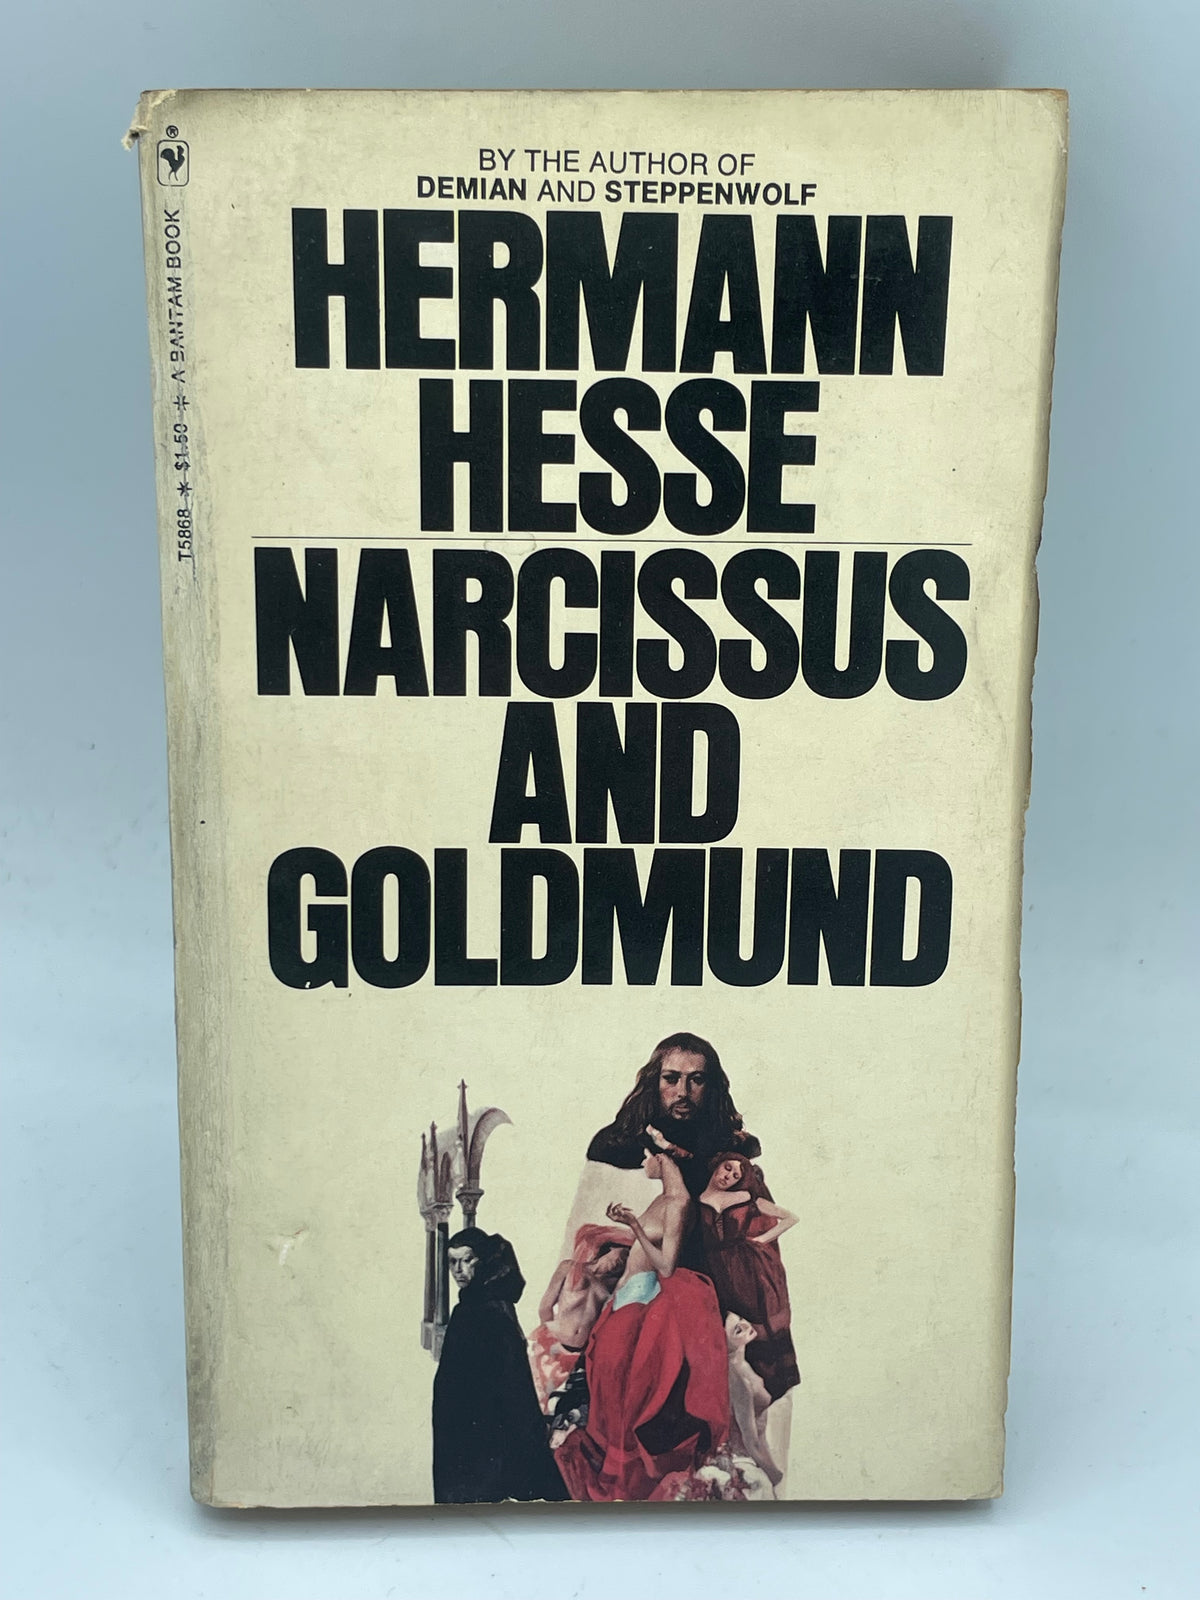 Narcissus and Goldmund